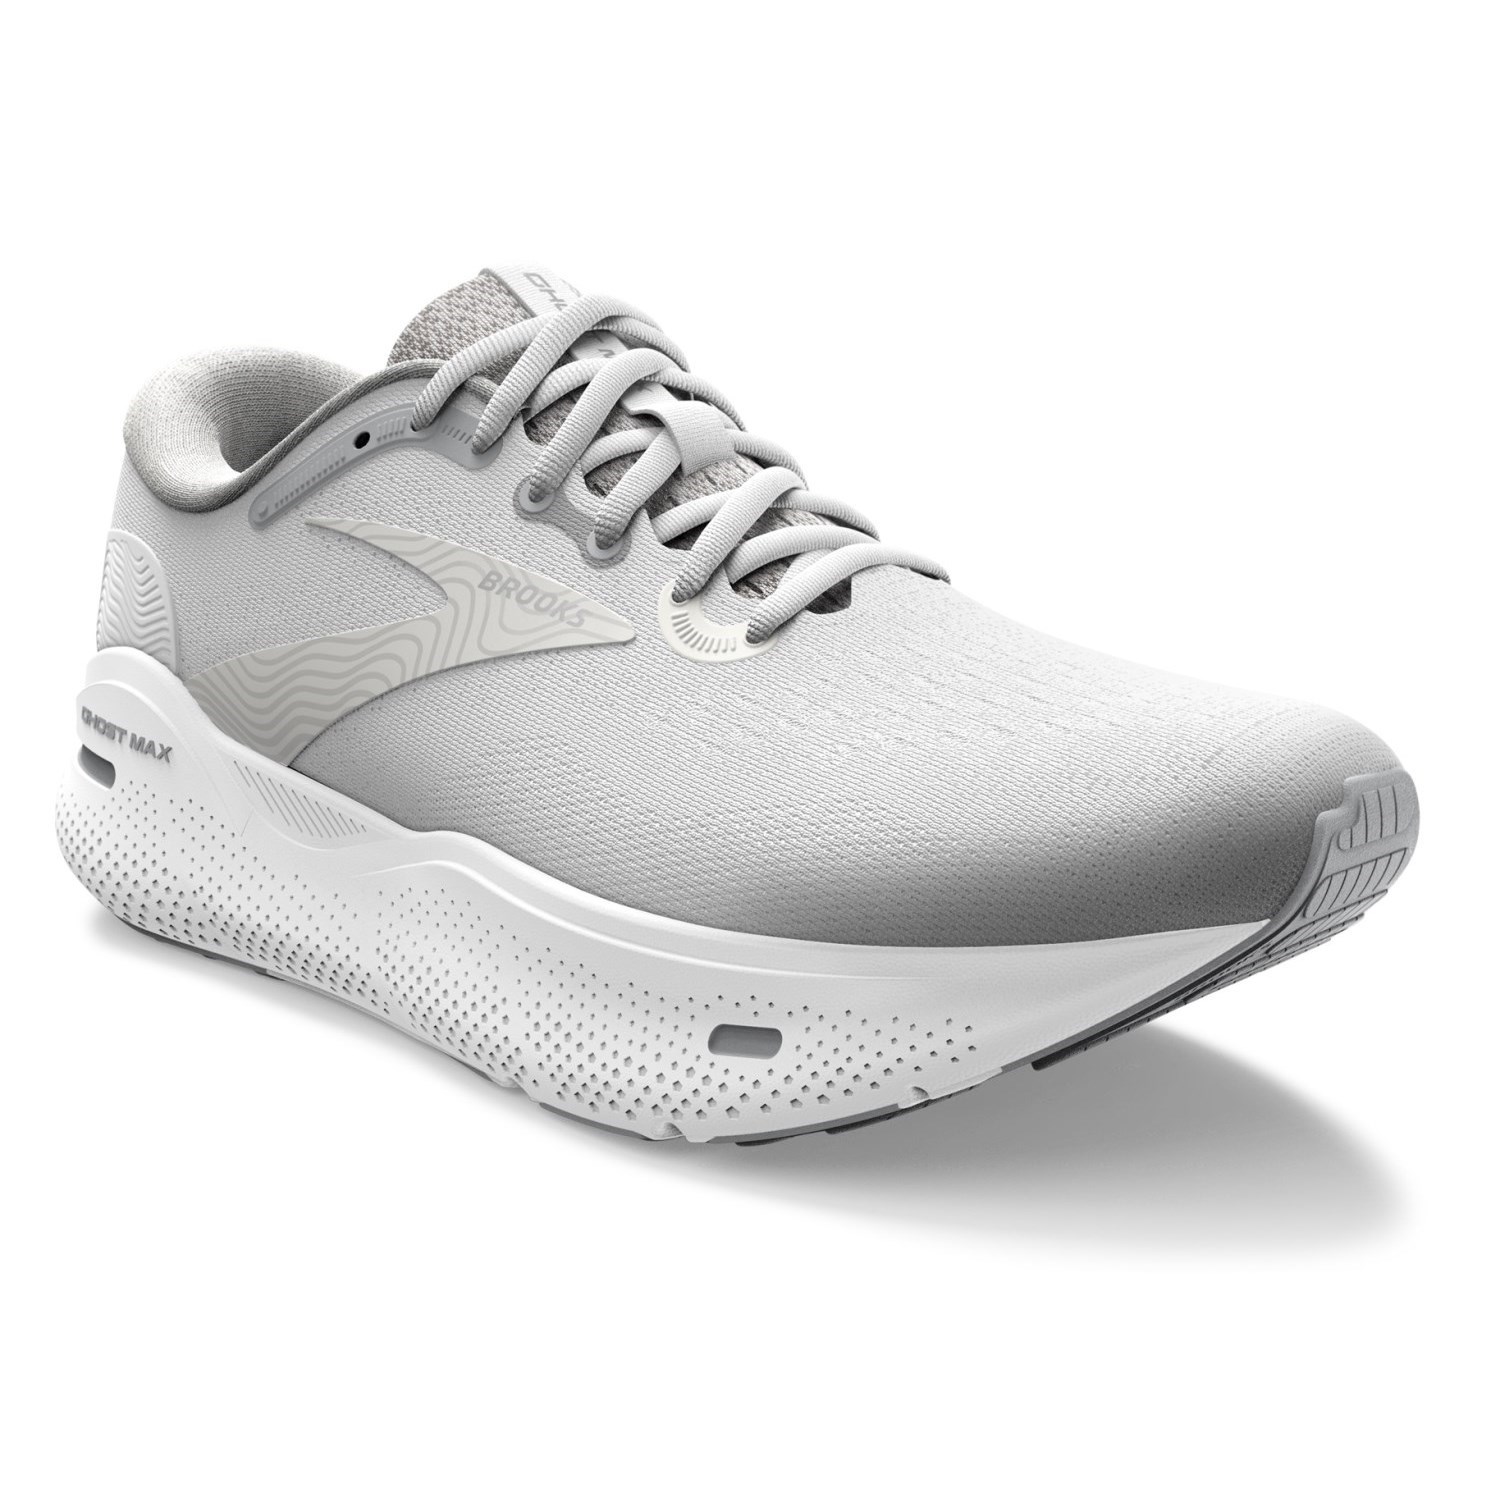 Brooks Ghost Max - Mens Running Shoes - White/Oyster/Metallic Silver ...